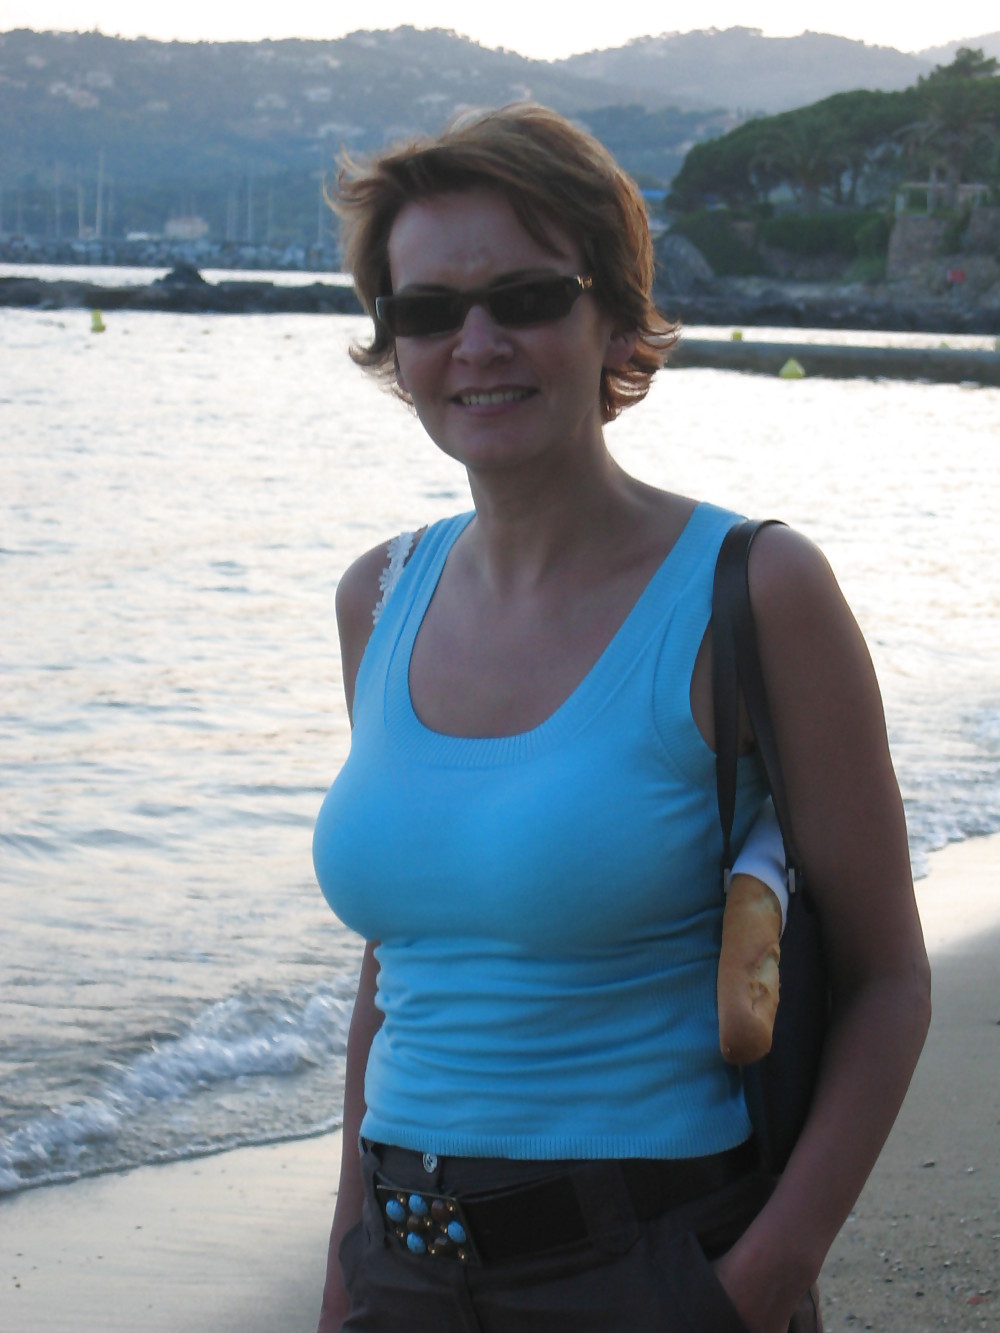 Short-Haired, Busty, Saggy Mature on the Beach #37559188